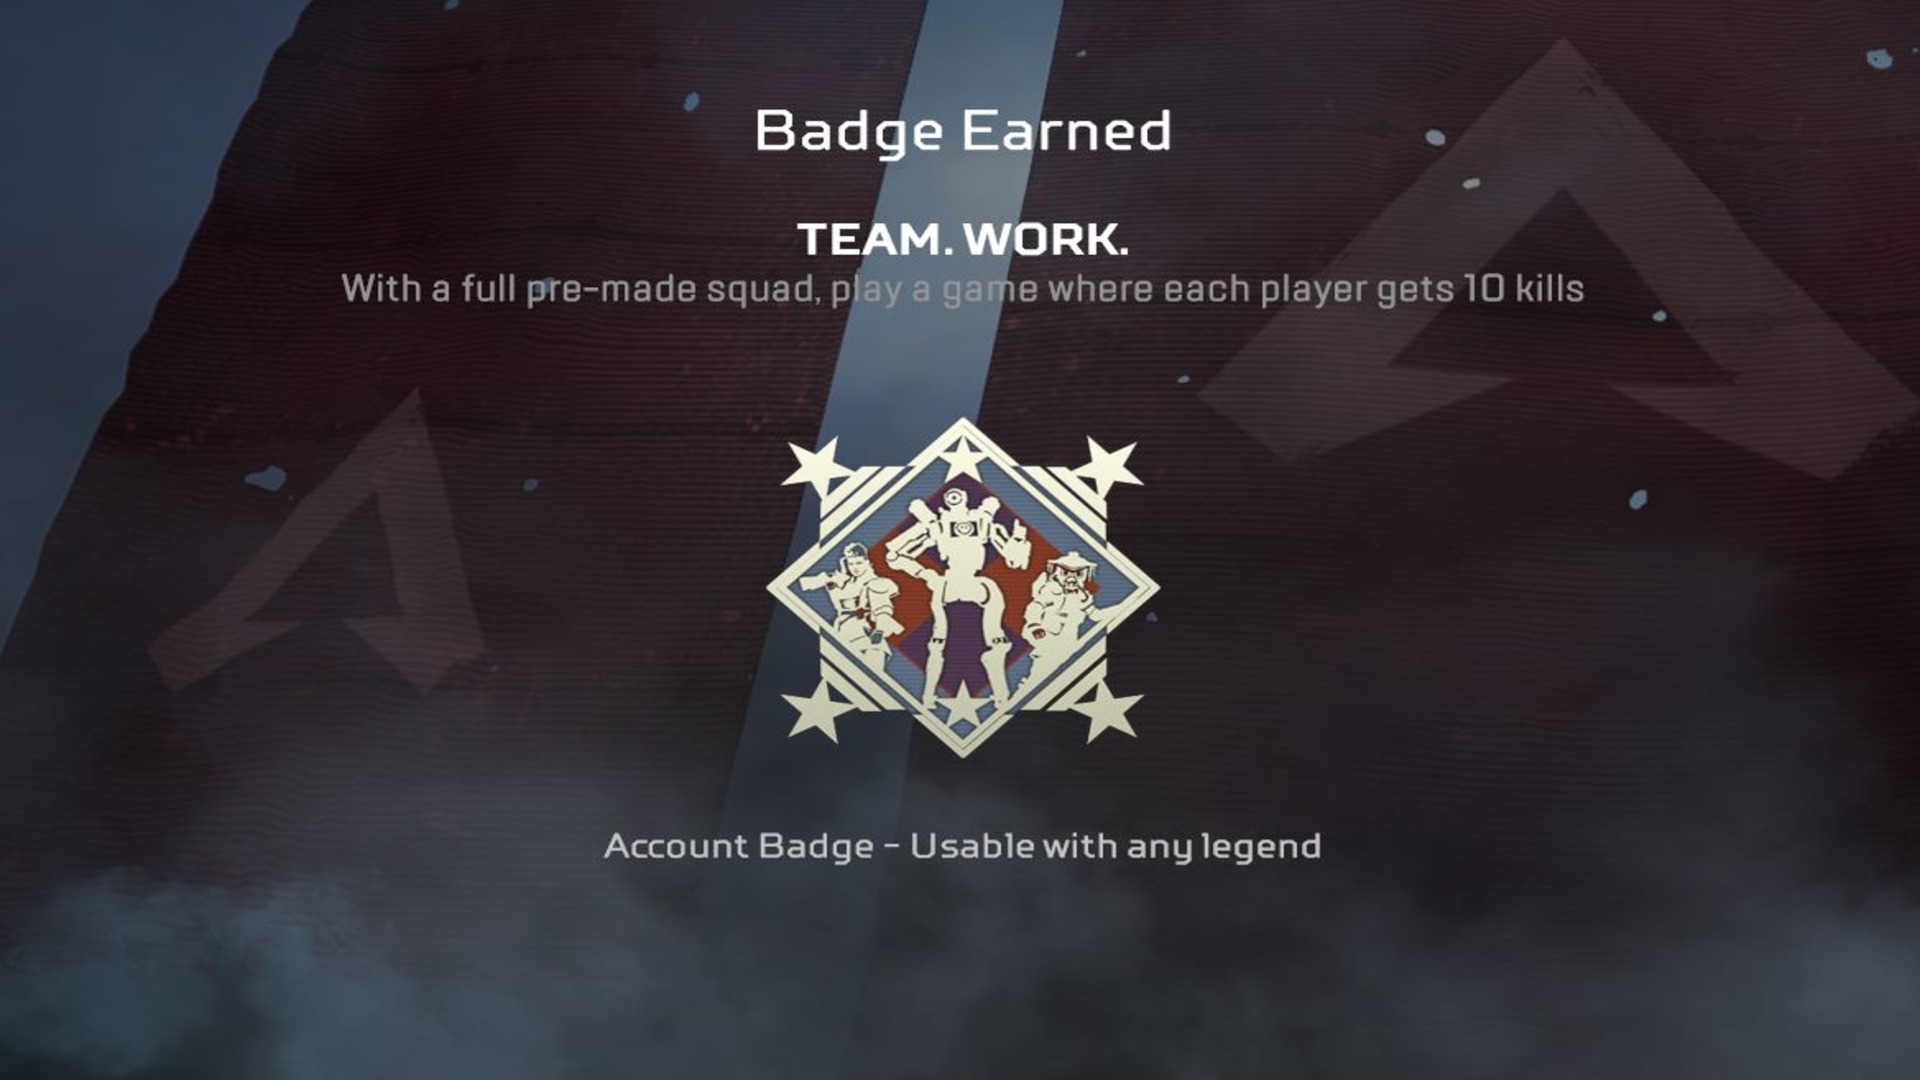 How to get the Apex Legends Teamwork Badge